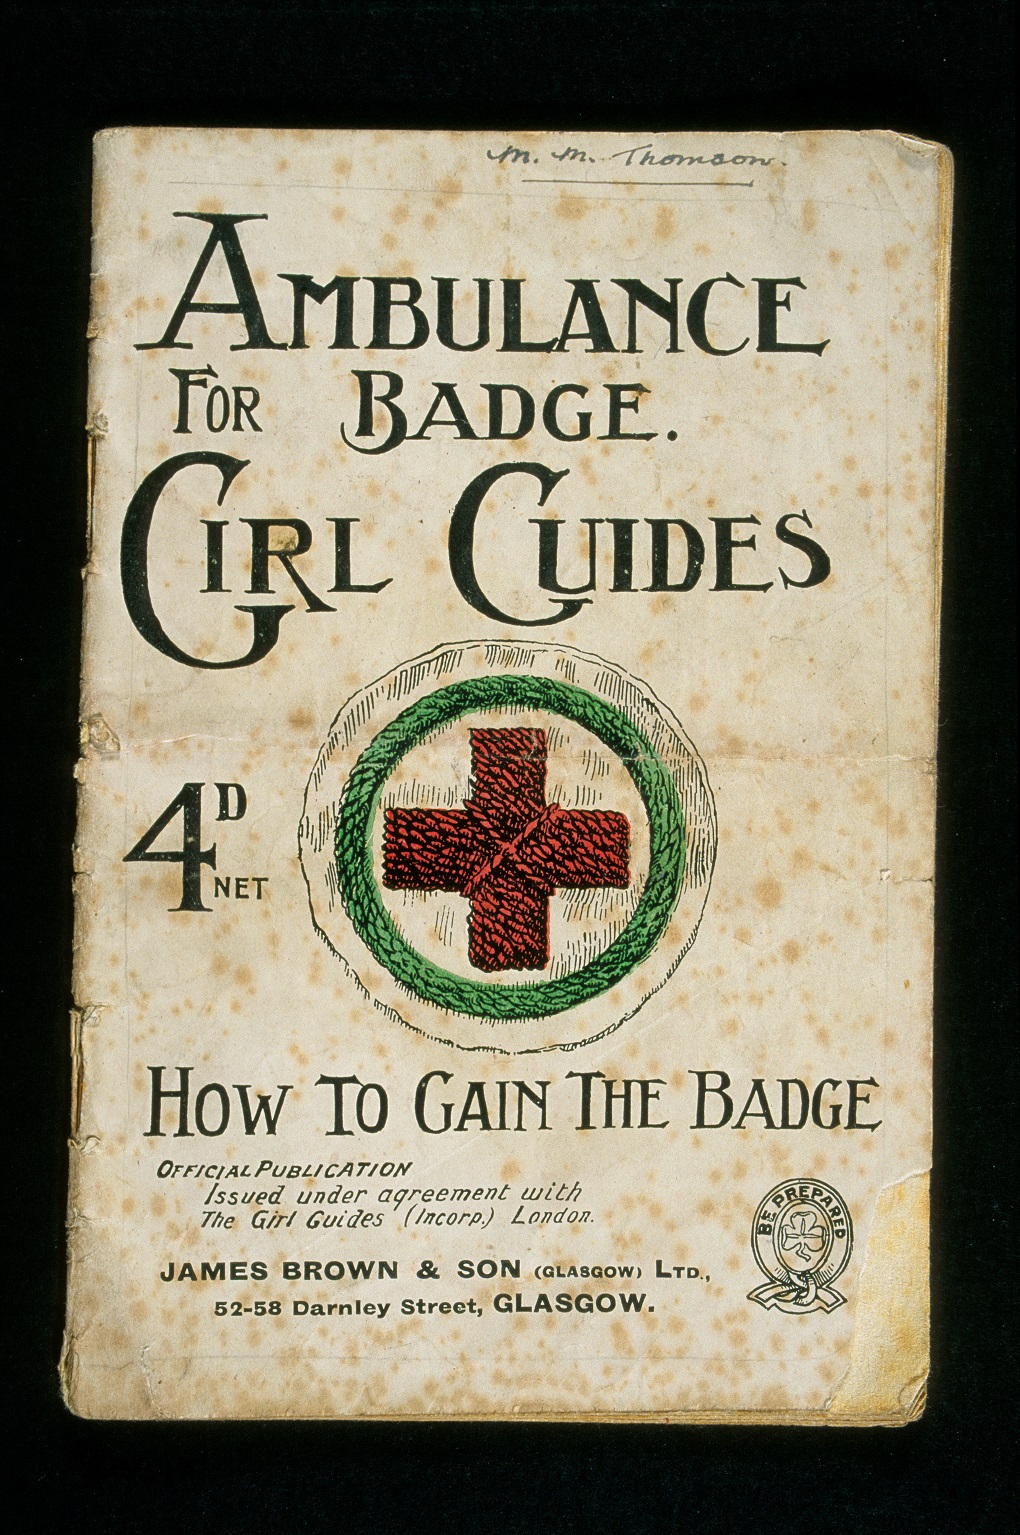 An archive photo of a Girlguiding booklet cover page on how girl guides can attain their ambulance badge. The text reads "Ambulance badge for Girl Guides. 4D NET. How to gain the badge"